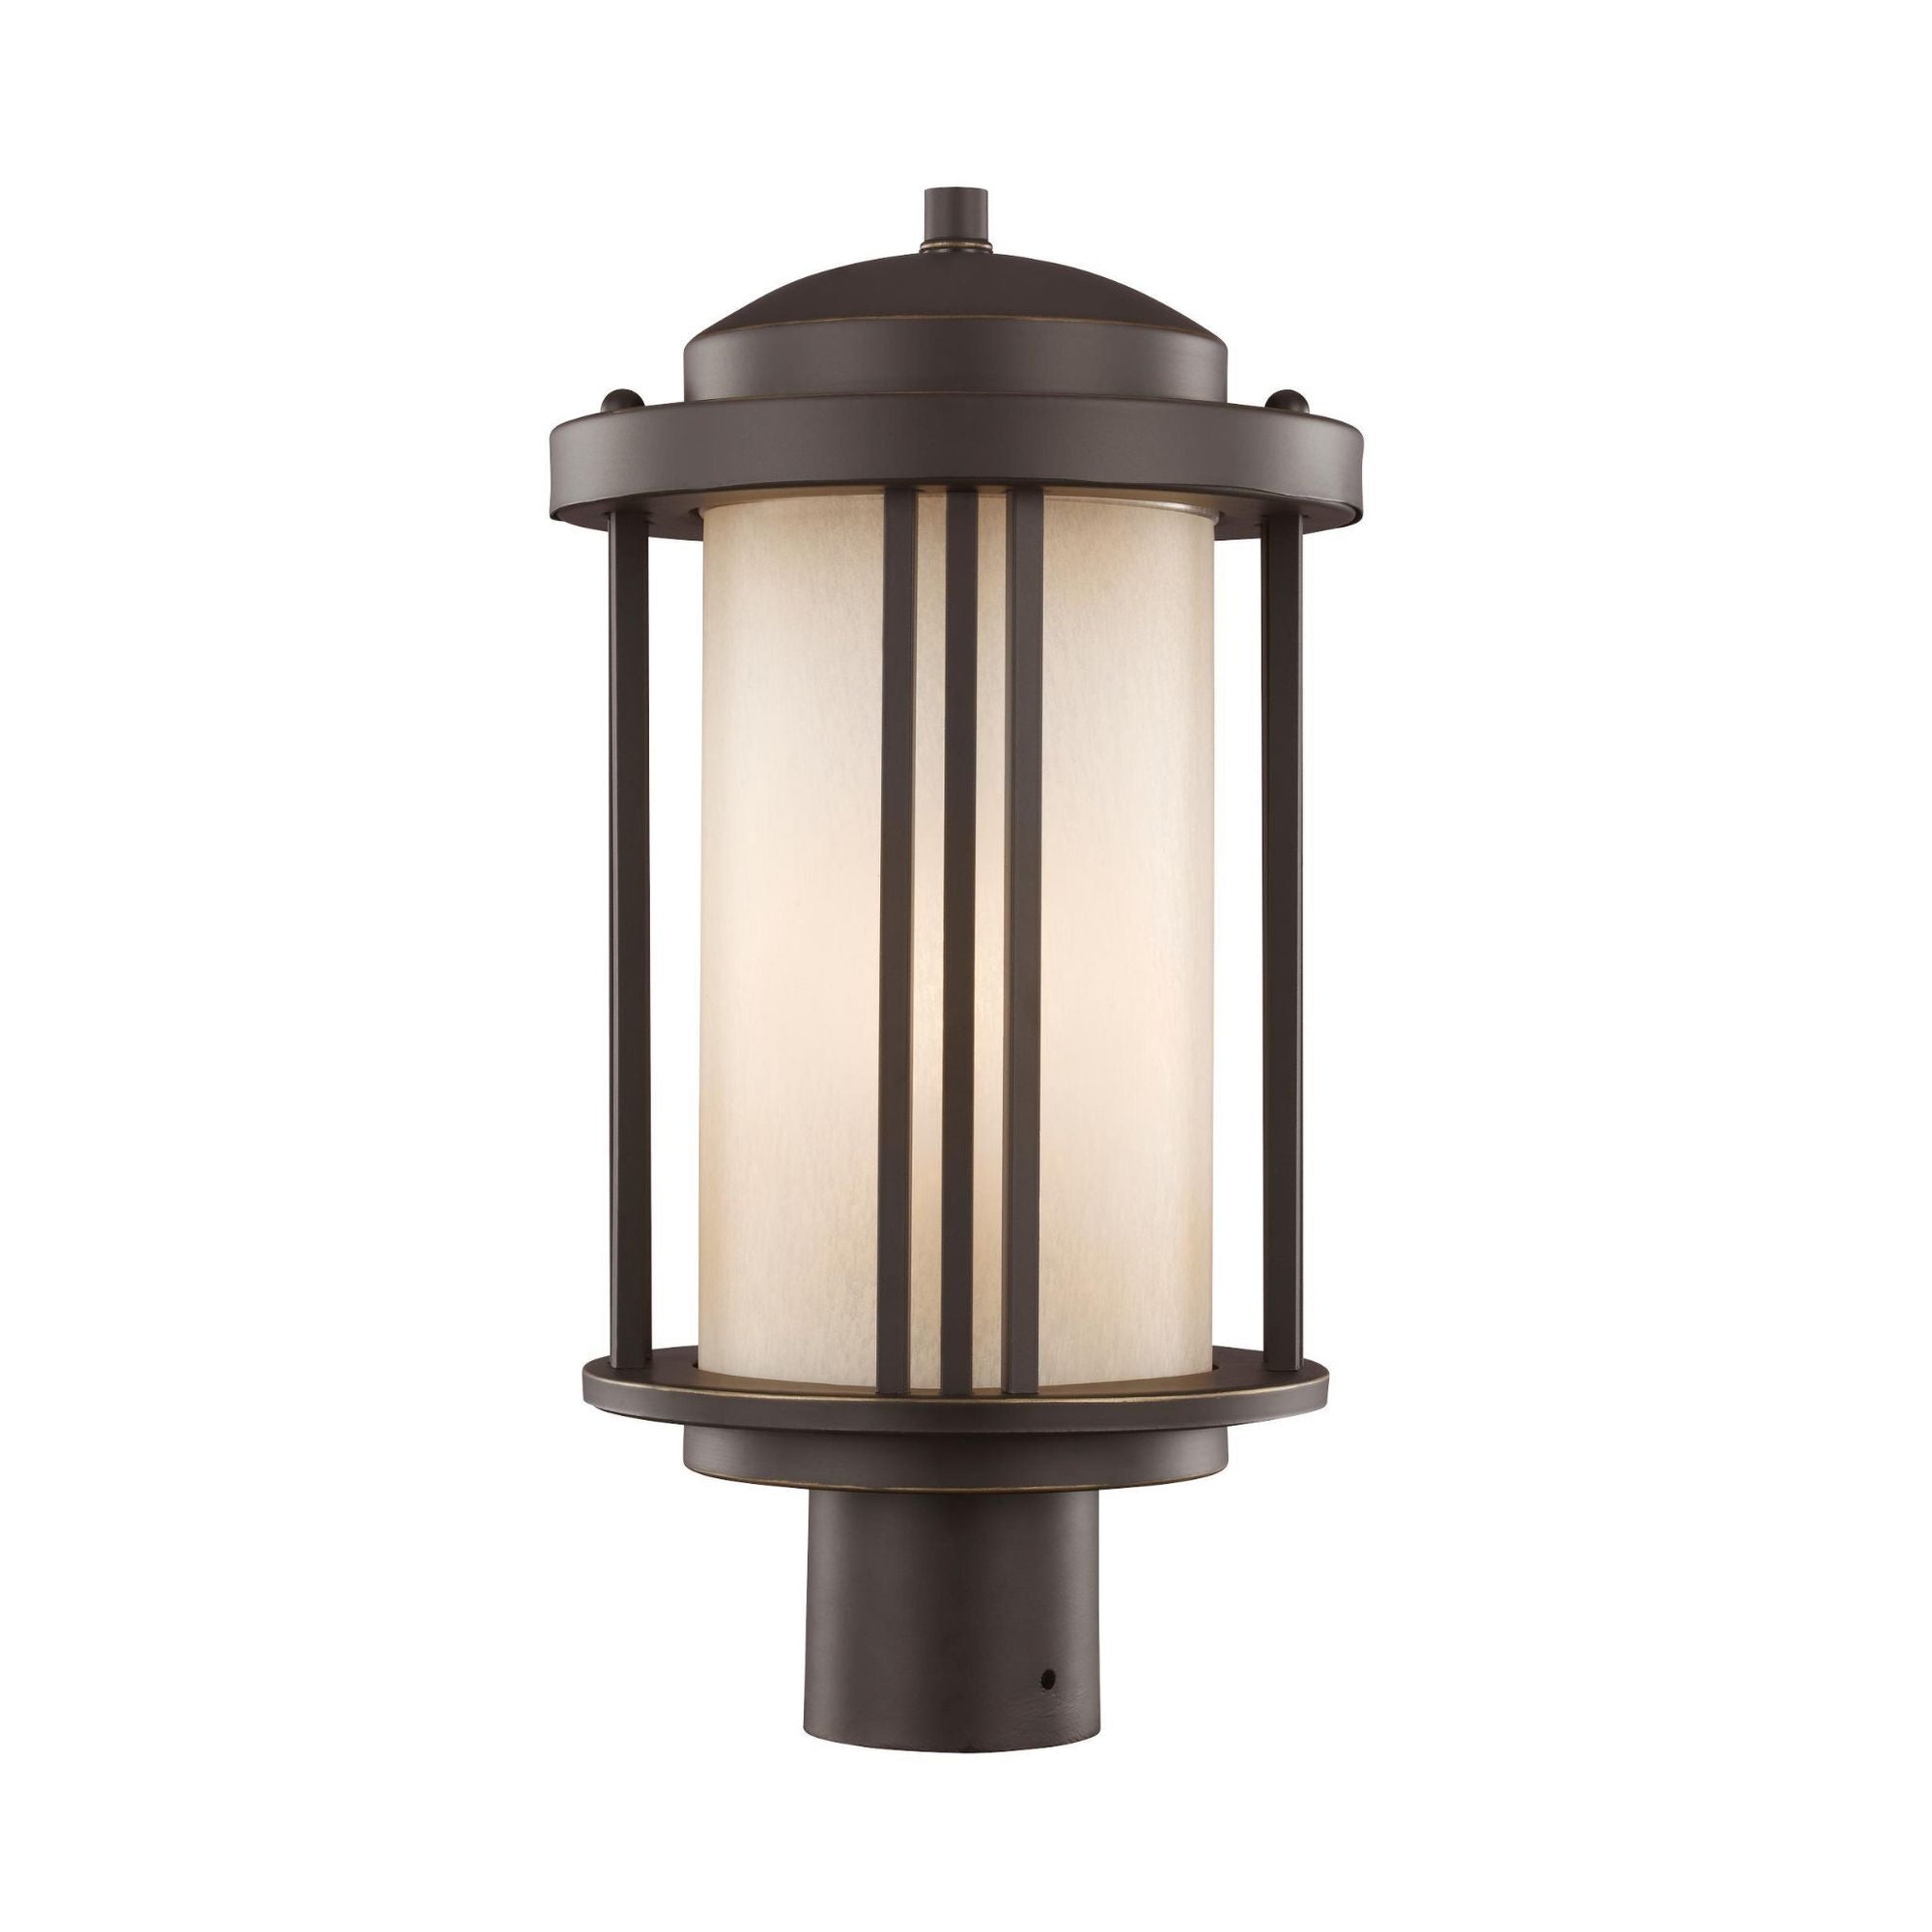 Crowell One Light Outdoor Post Lantern LED Contemporary Fixture 17" Height Aluminum Round Creme Parchment Shade in Antique Bronze